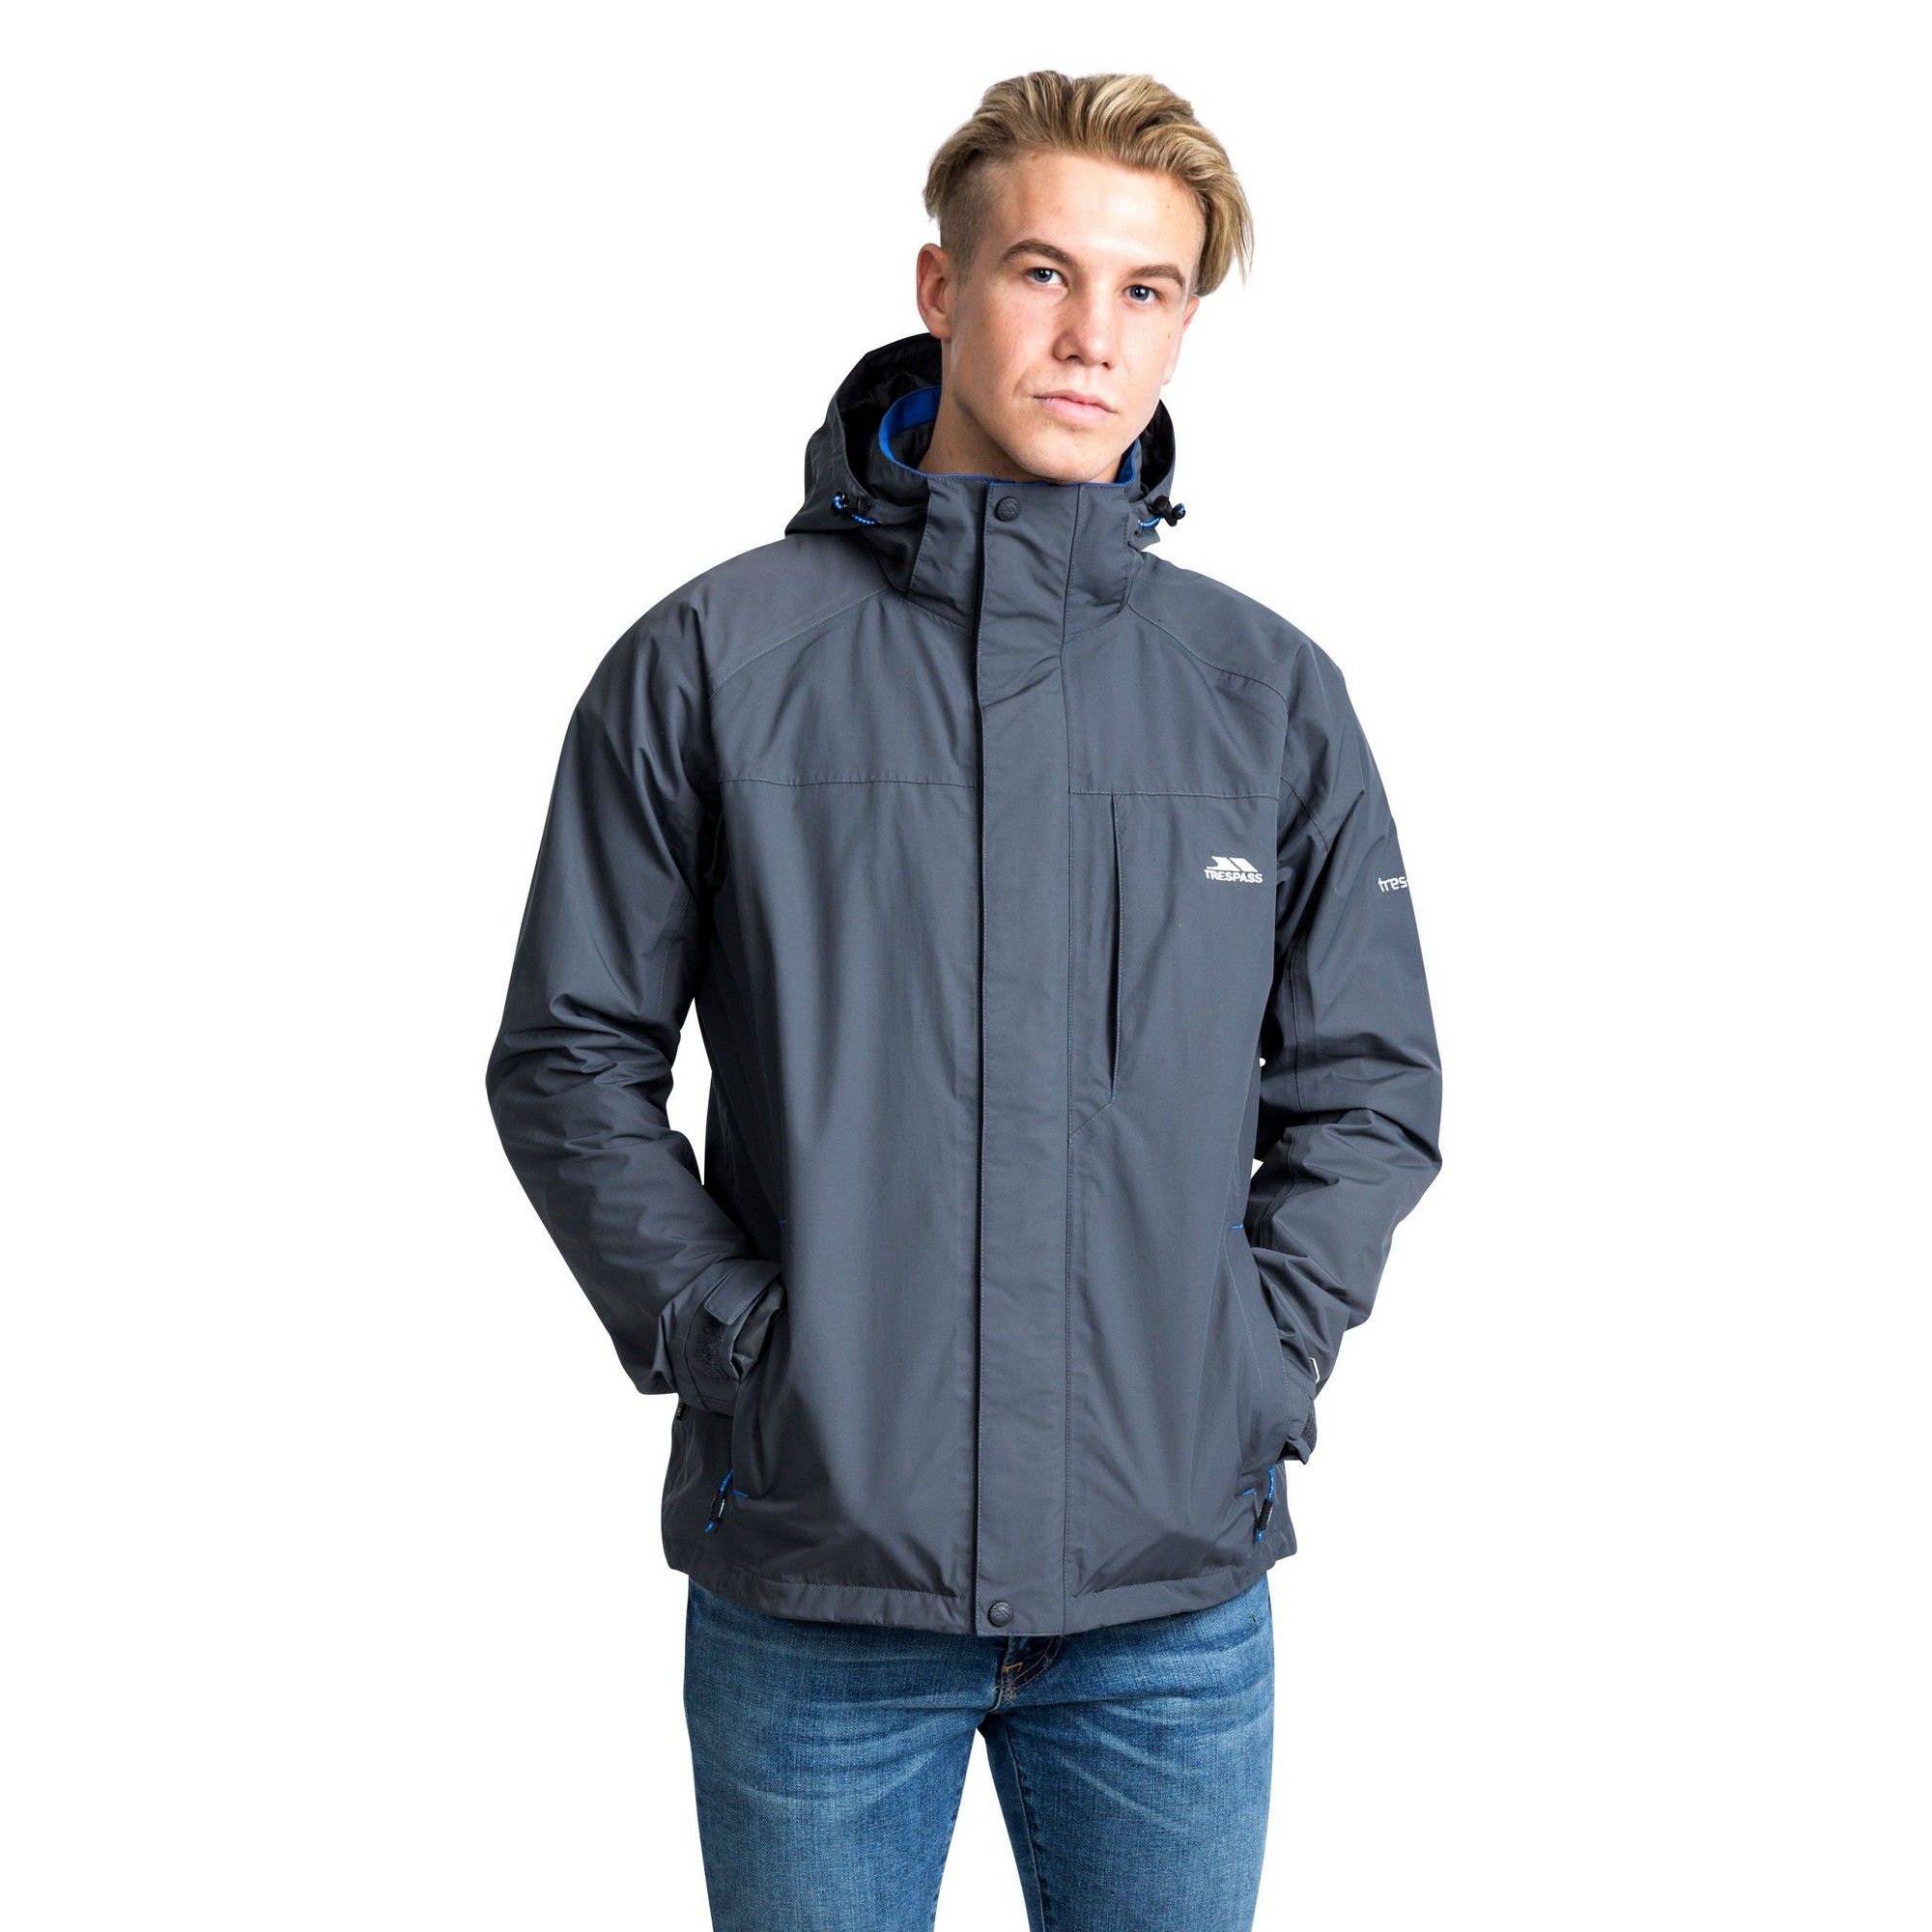 Waterproof jacket with adjustable concealed hood. 2 zipped lower pockets. Zipped chest pocket. Hem drawcord with side adjusters. Elasticated cuff with tab adjuster. Inner zipped pocket. Waterproof 5000mm, breathable 5000mvp, windproof, taped seams. Shell: 100% polyamide taslan, PU coating. Lining: 100% polyester. Trespass Mens Chest Sizing (approx): S - 35-37in/89-94cm, M - 38-40in/96.5-101.5cm, L - 41-43in/104-109cm, XL - 44-46in/111.5-117cm, XXL - 46-48in/117-122cm, 3XL - 48-50in/122-127cm.